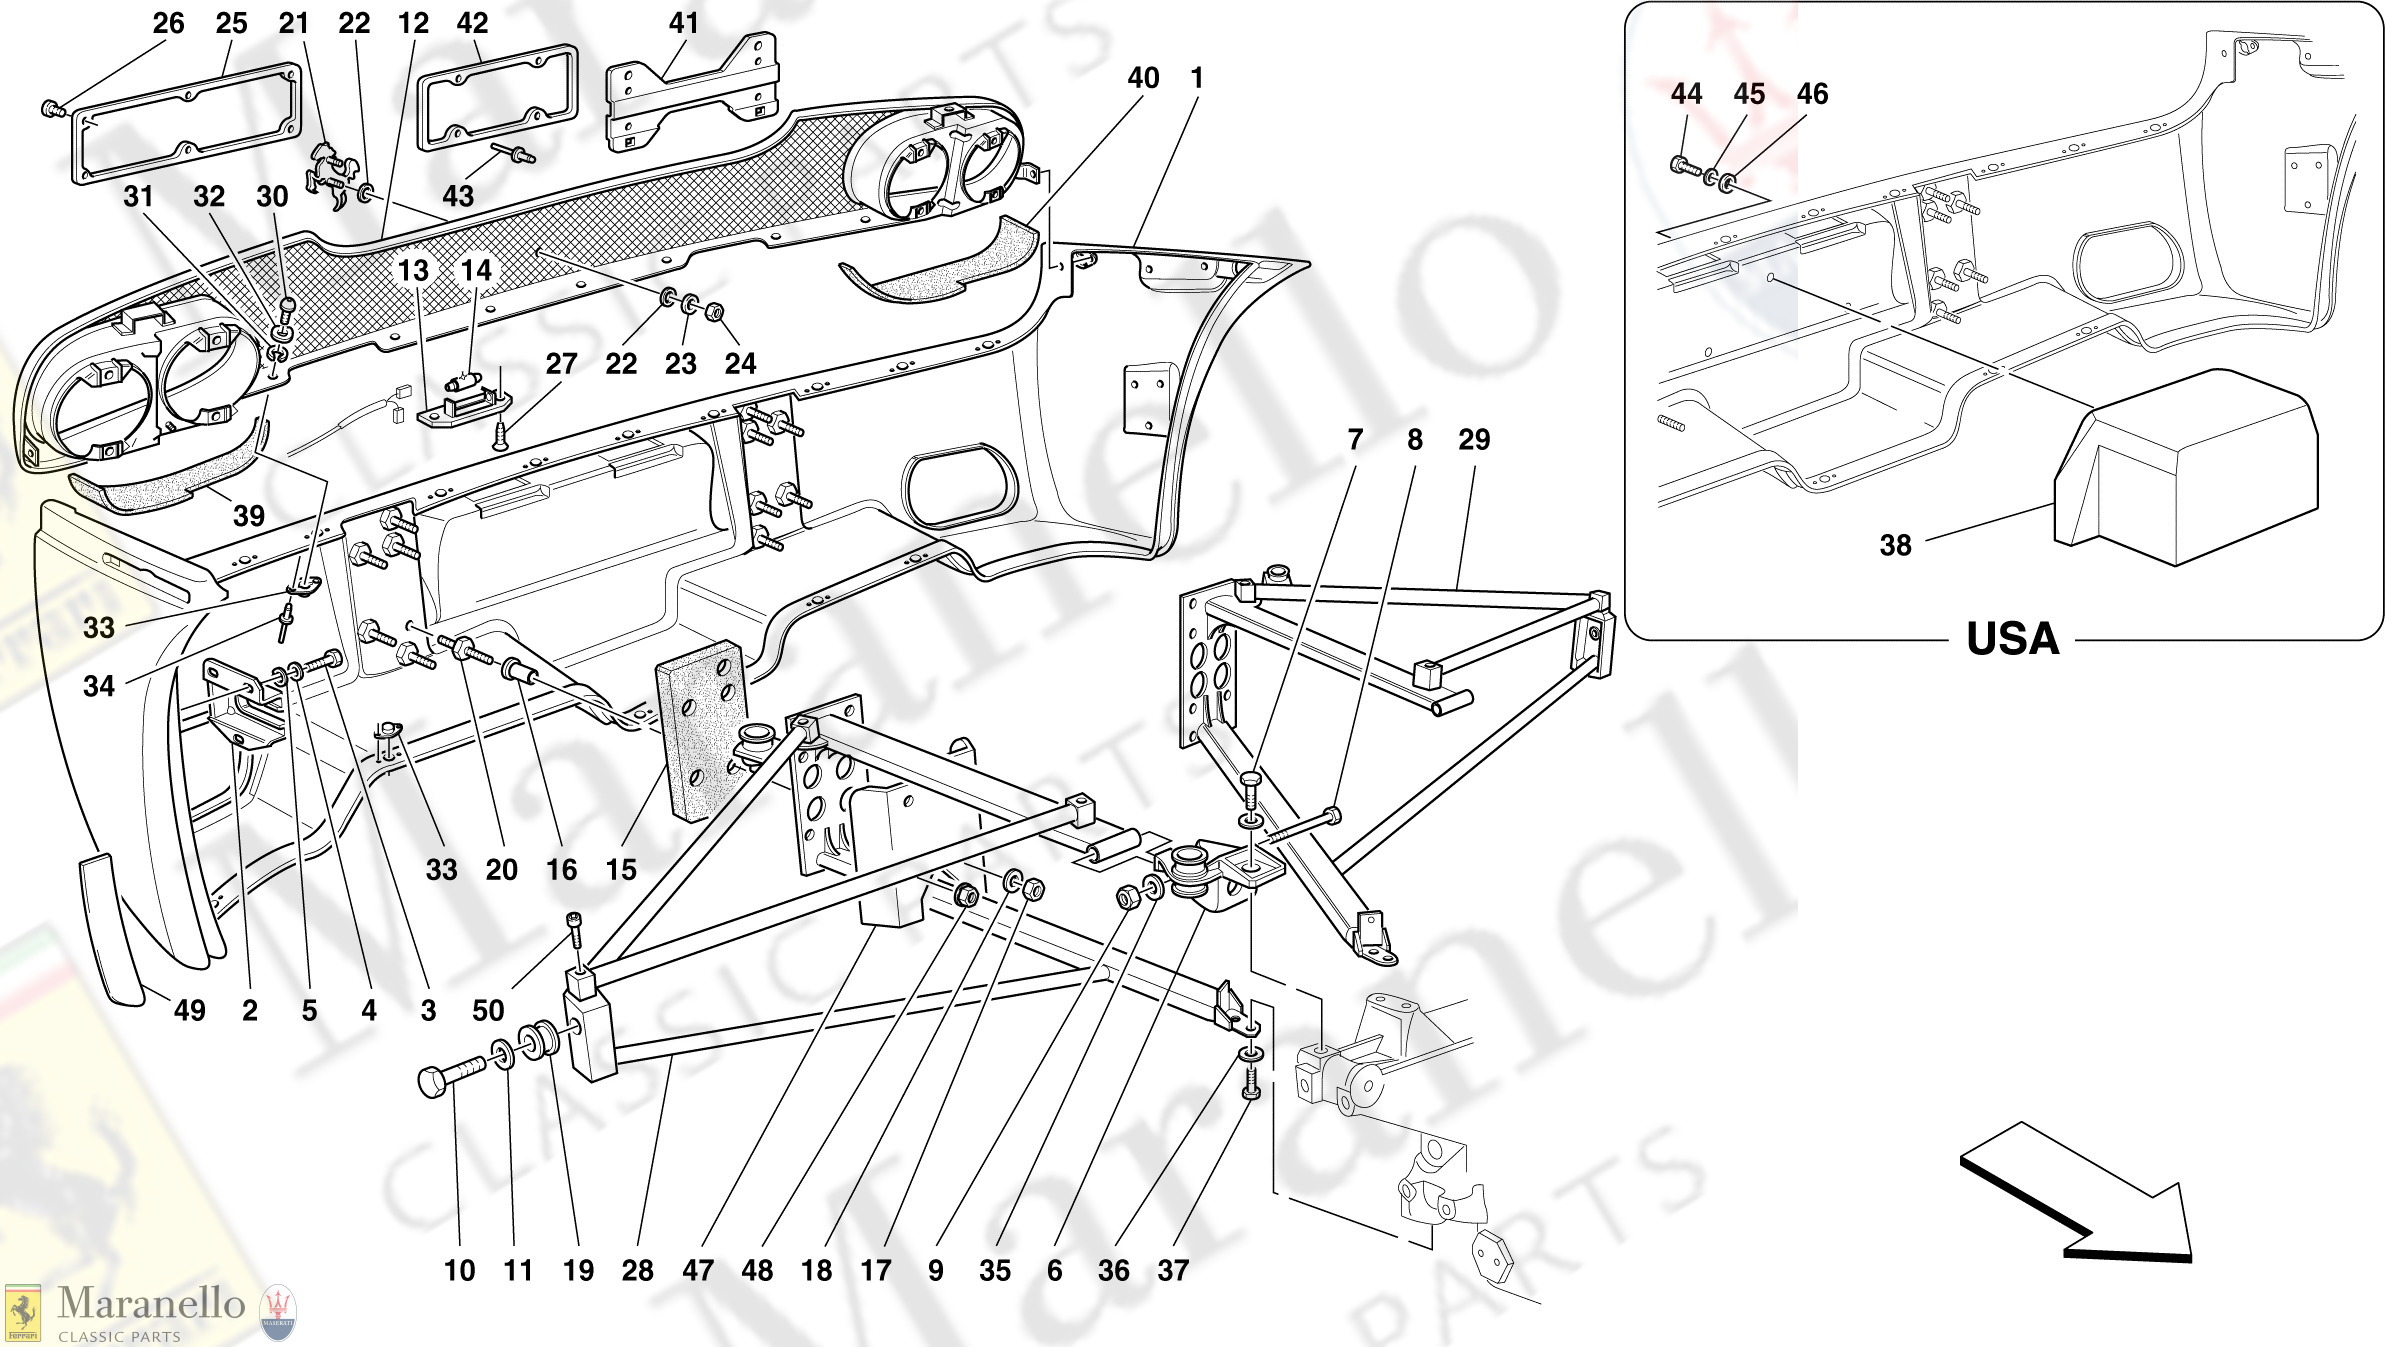 102 - Rear Bumper And Supports